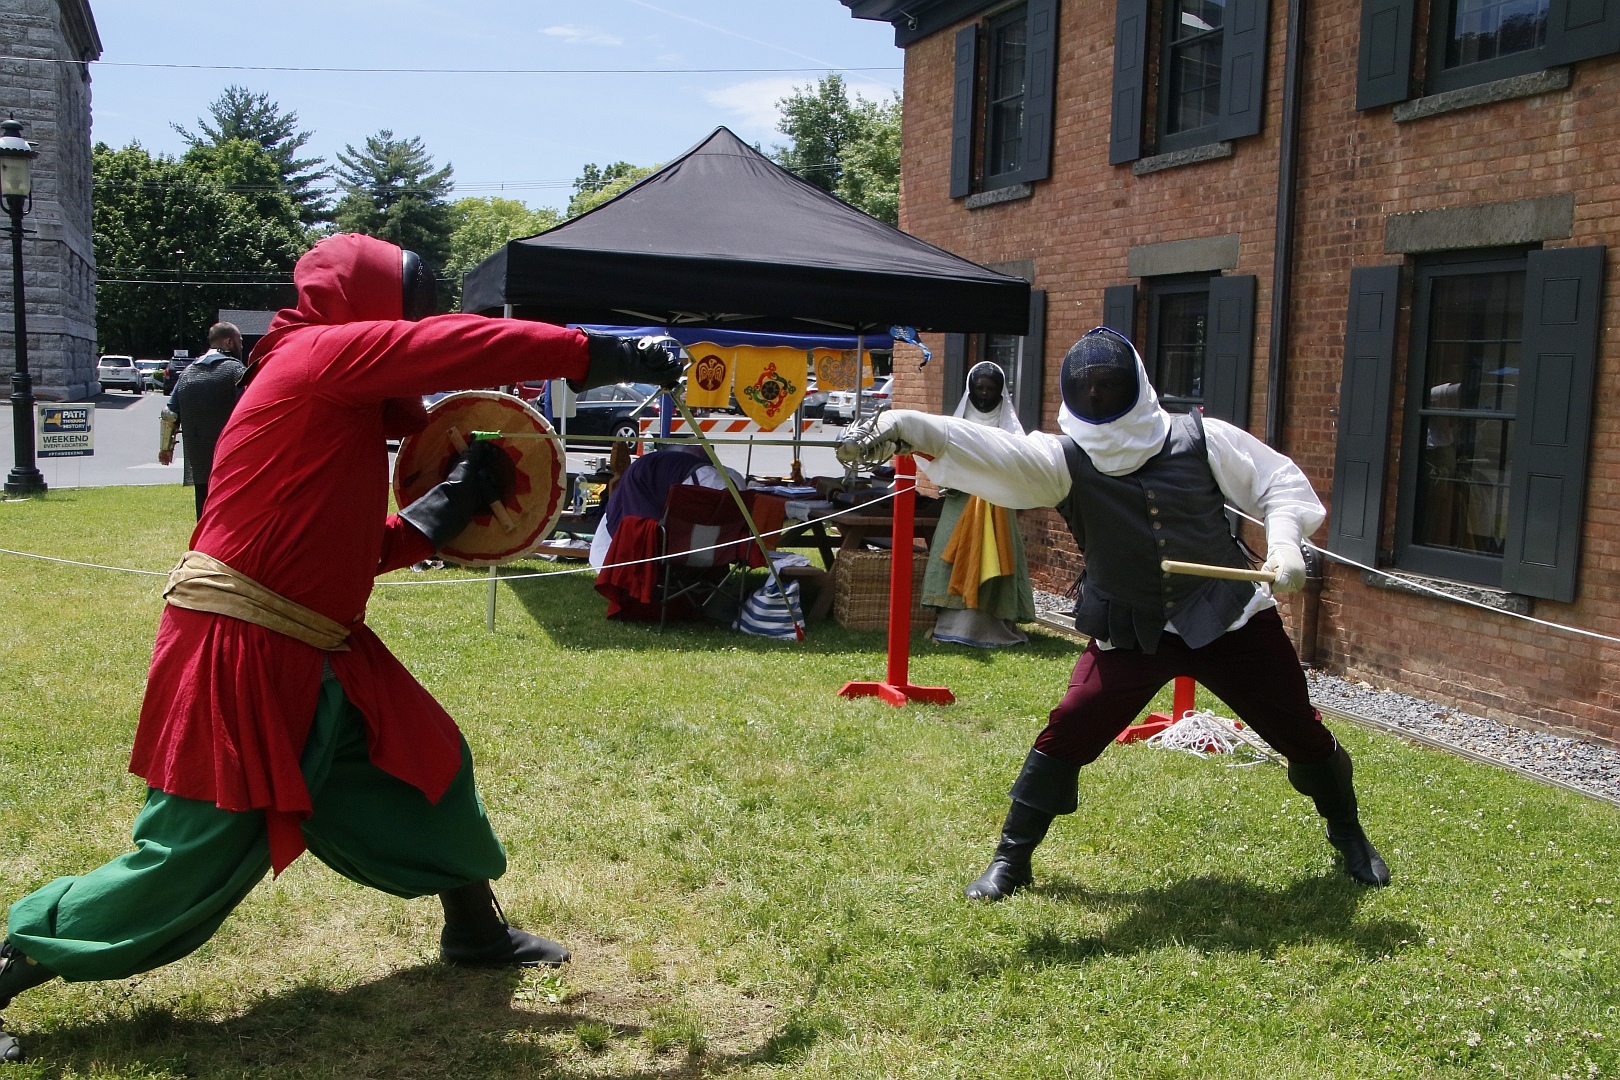 Medieval Reenactors Society for Creative Anachronism at Persen House